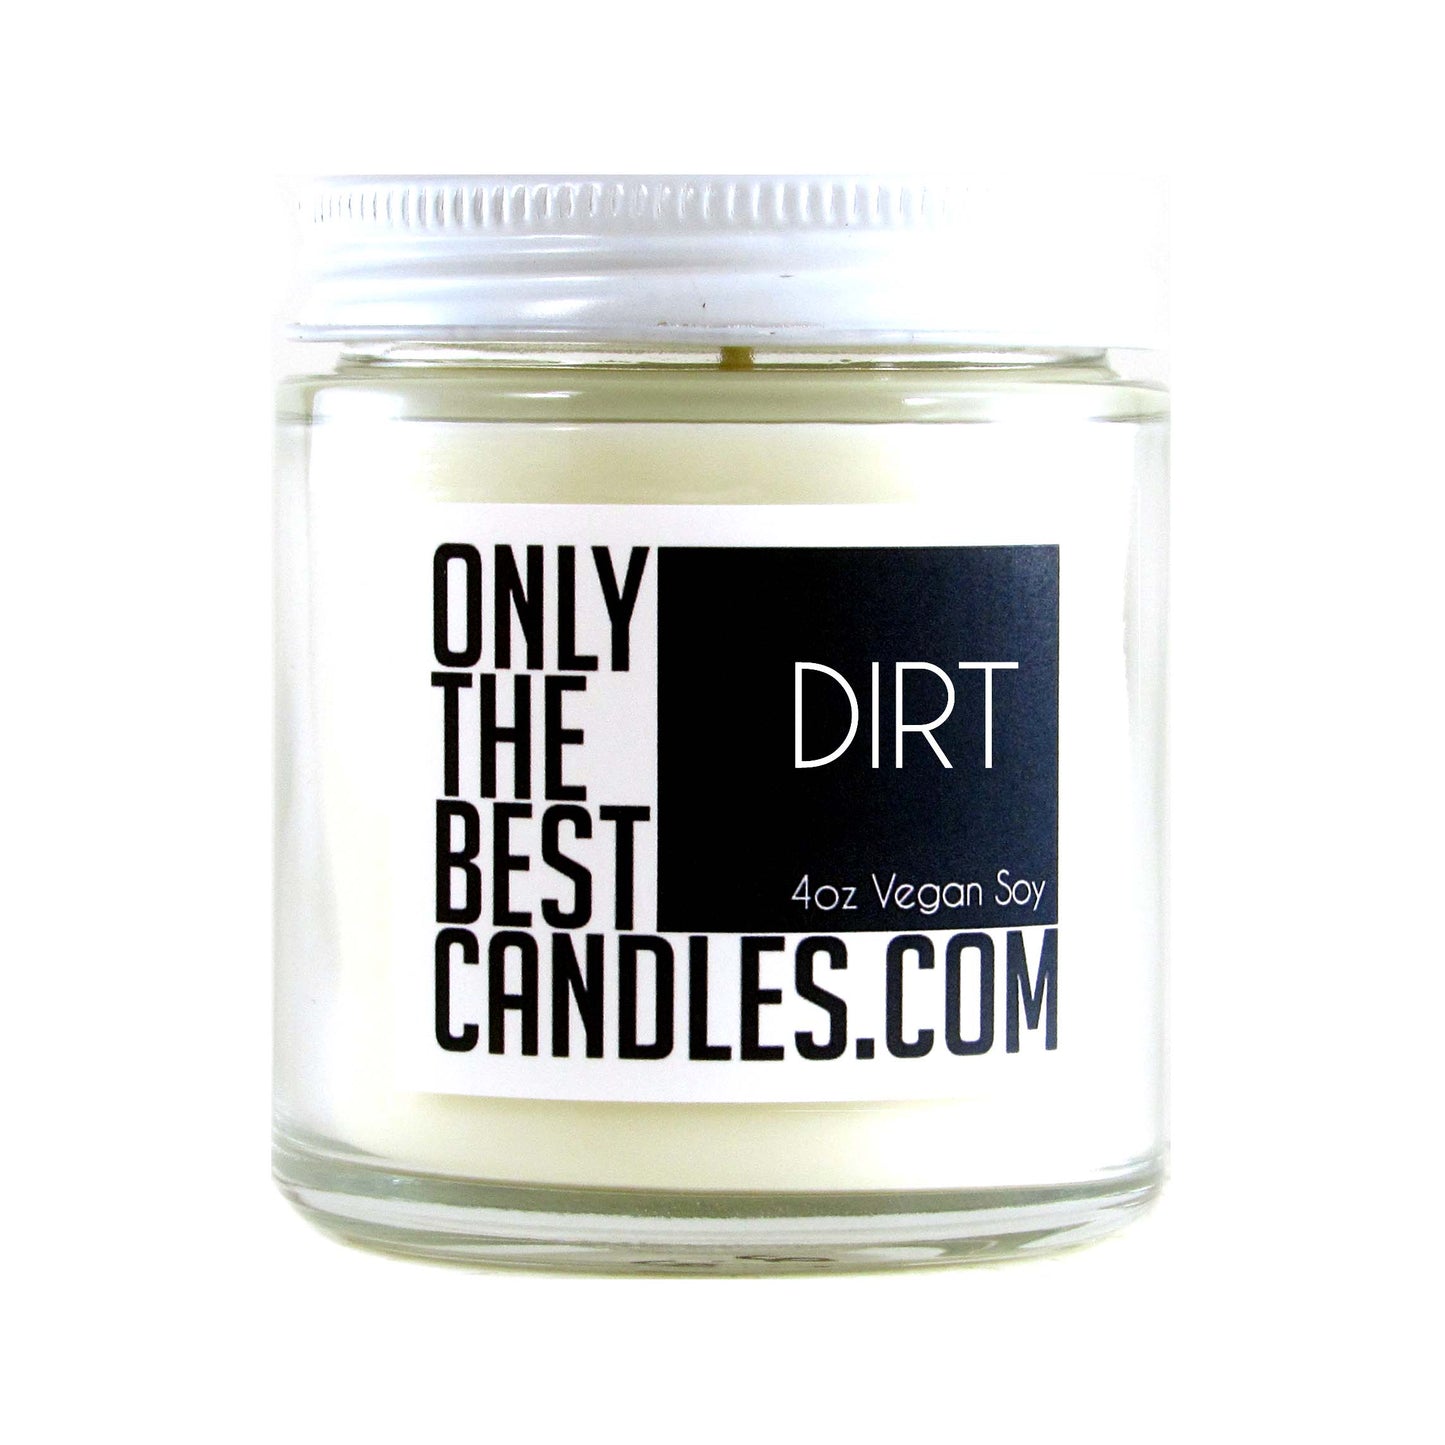 Dirt 4oz Candle